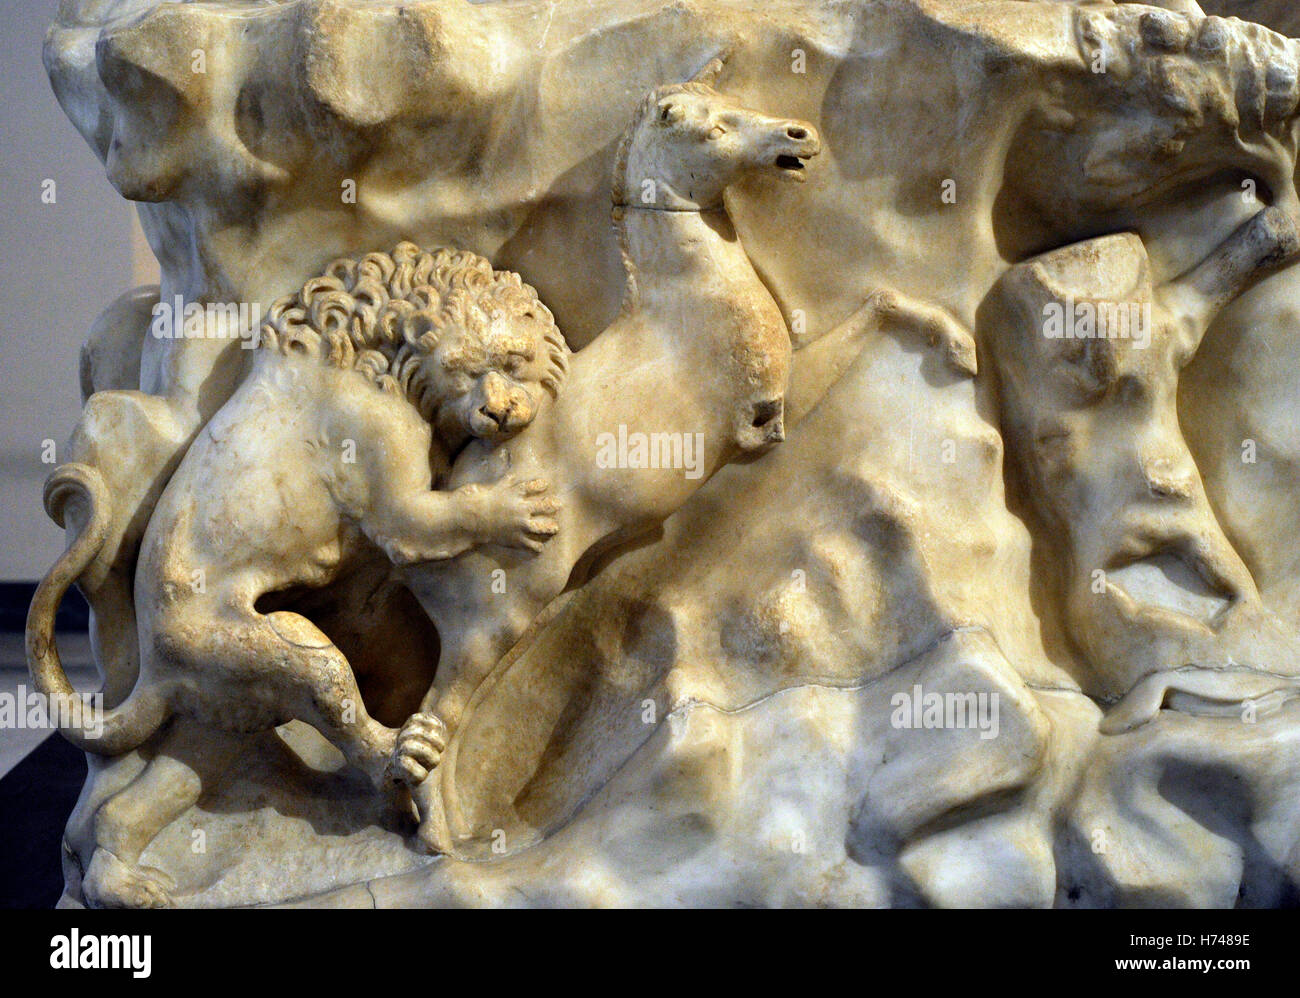 The Farnese Bull. Roman copy (3rd century AD) of a Hellenistic sculpture. Myth of Dirce. Base. Relief. Hunting scene. From baths of Caracalla, Rome. National Archaeological Museum, Naples. Italy. Stock Photo